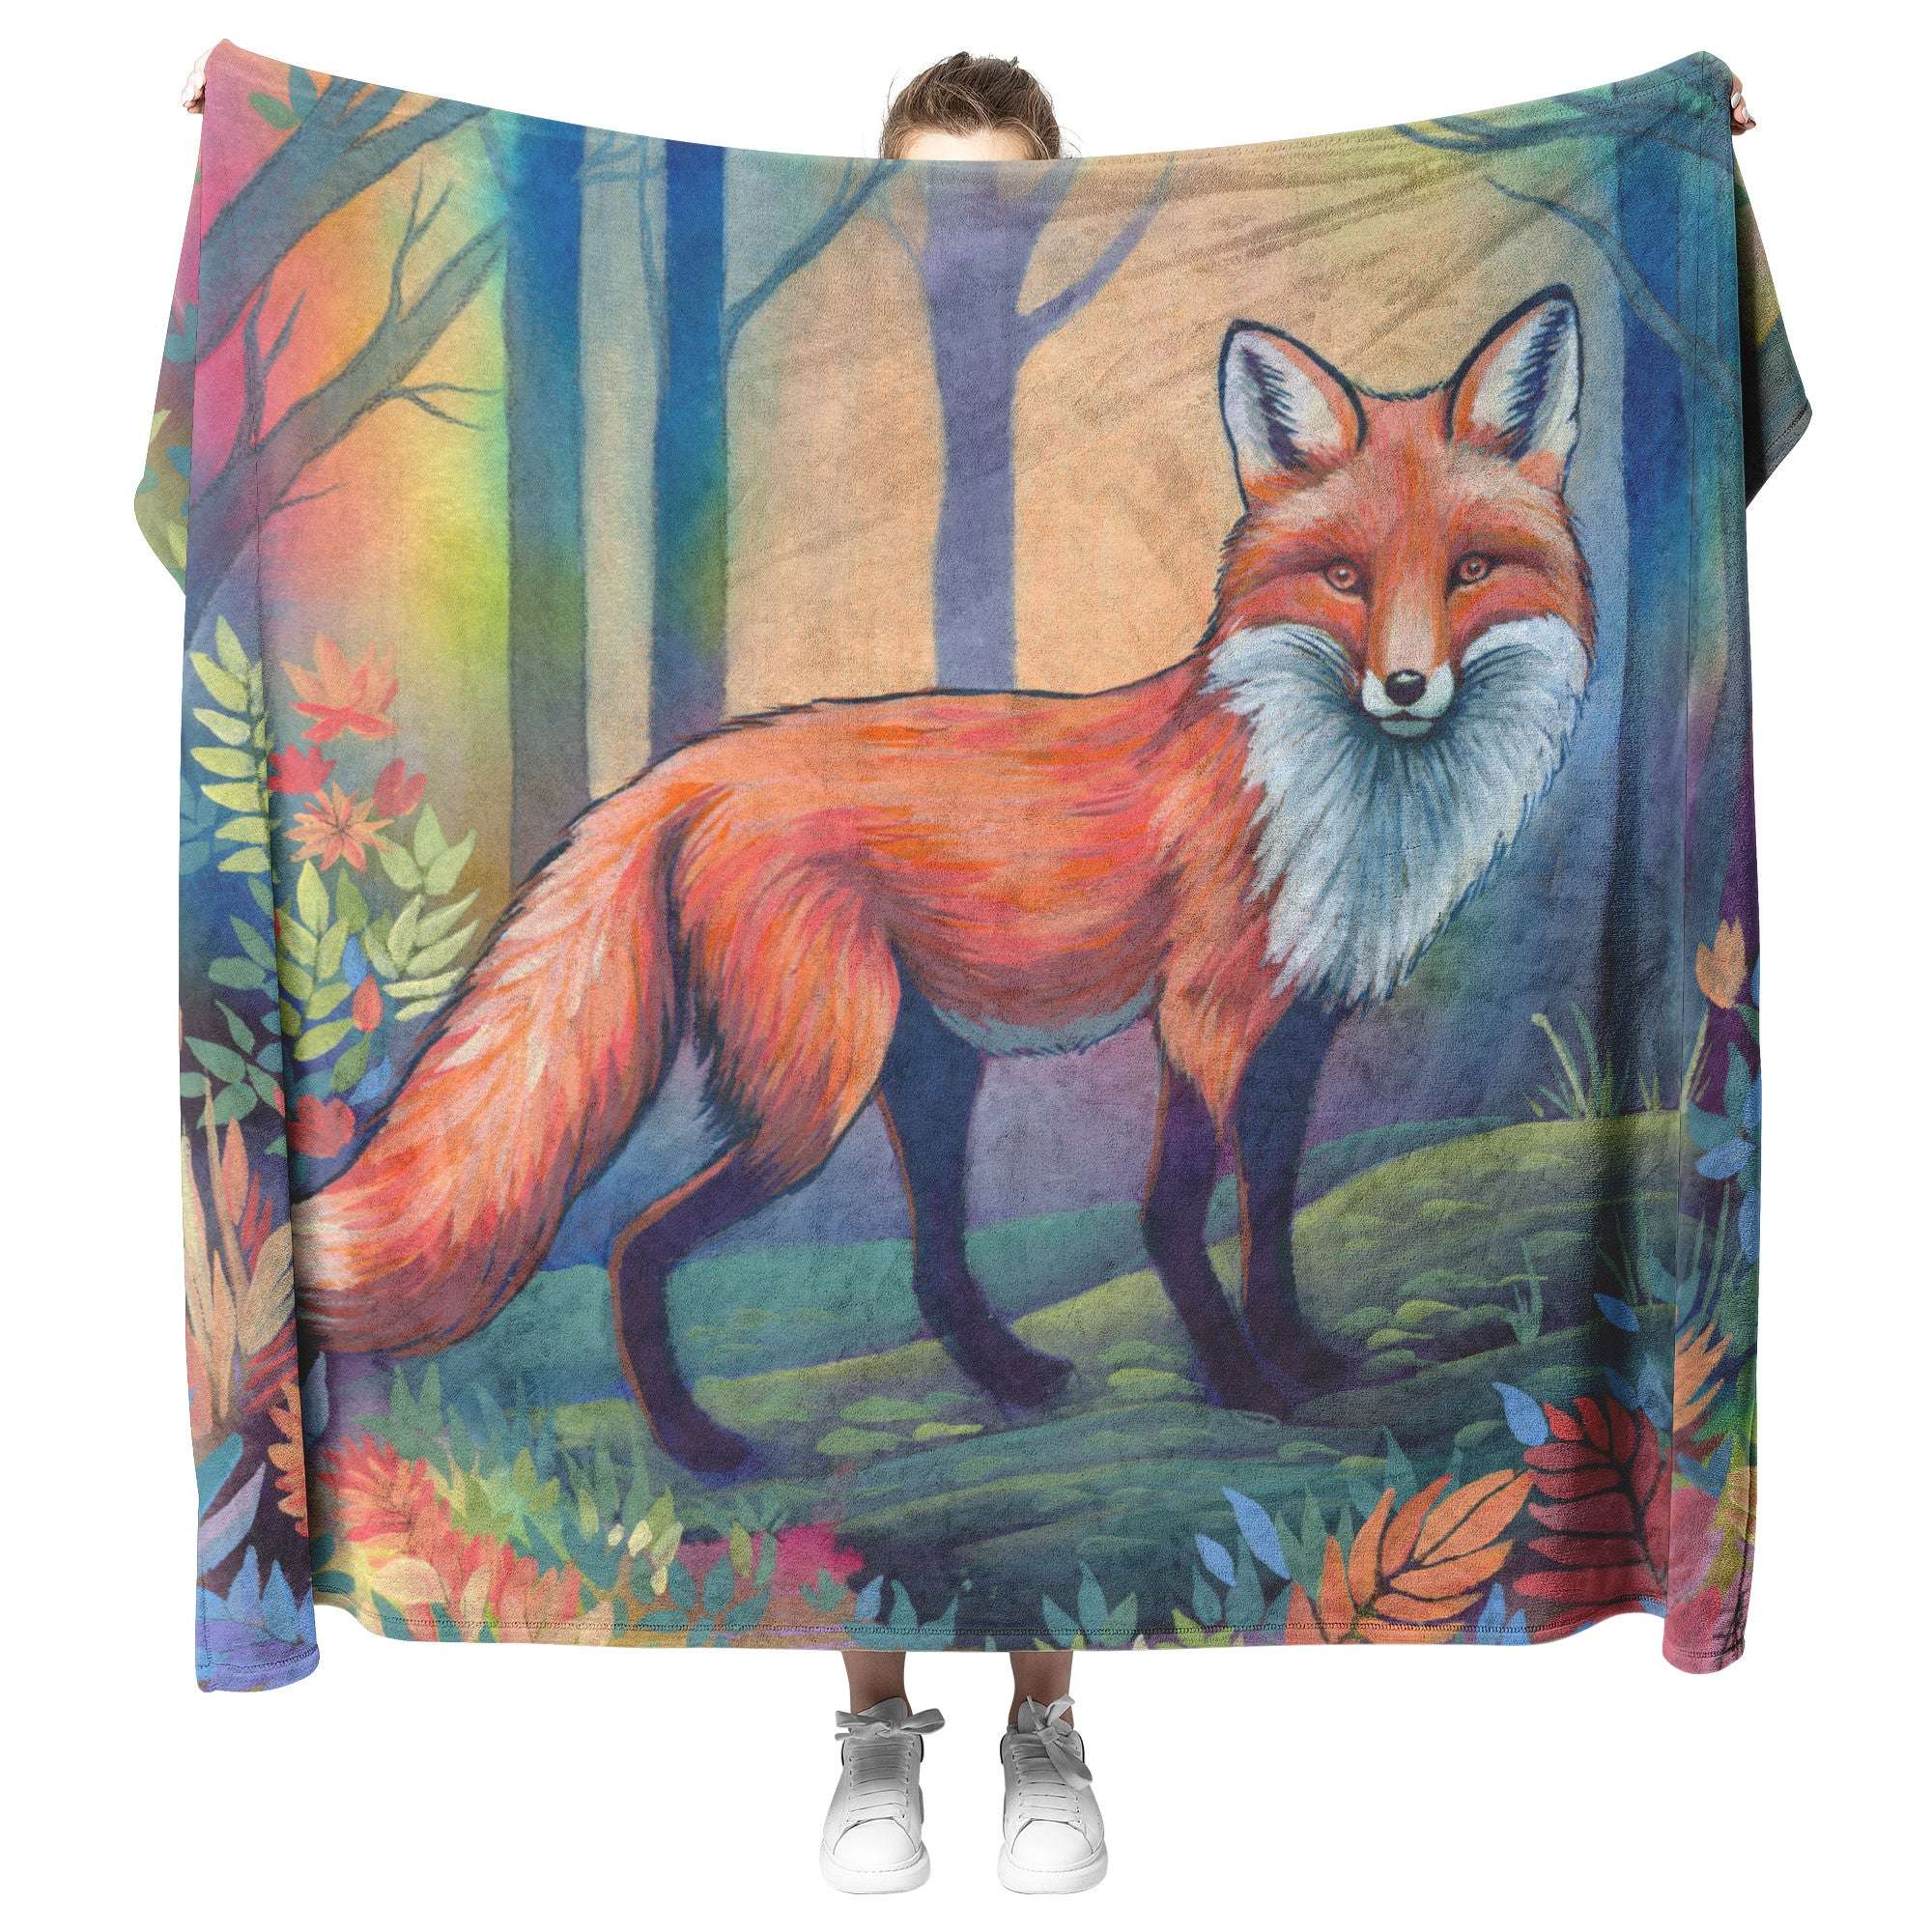 A person stands holding a large Fox Blanket featuring a vibrant painting of a red fox in a colorful forest scene.